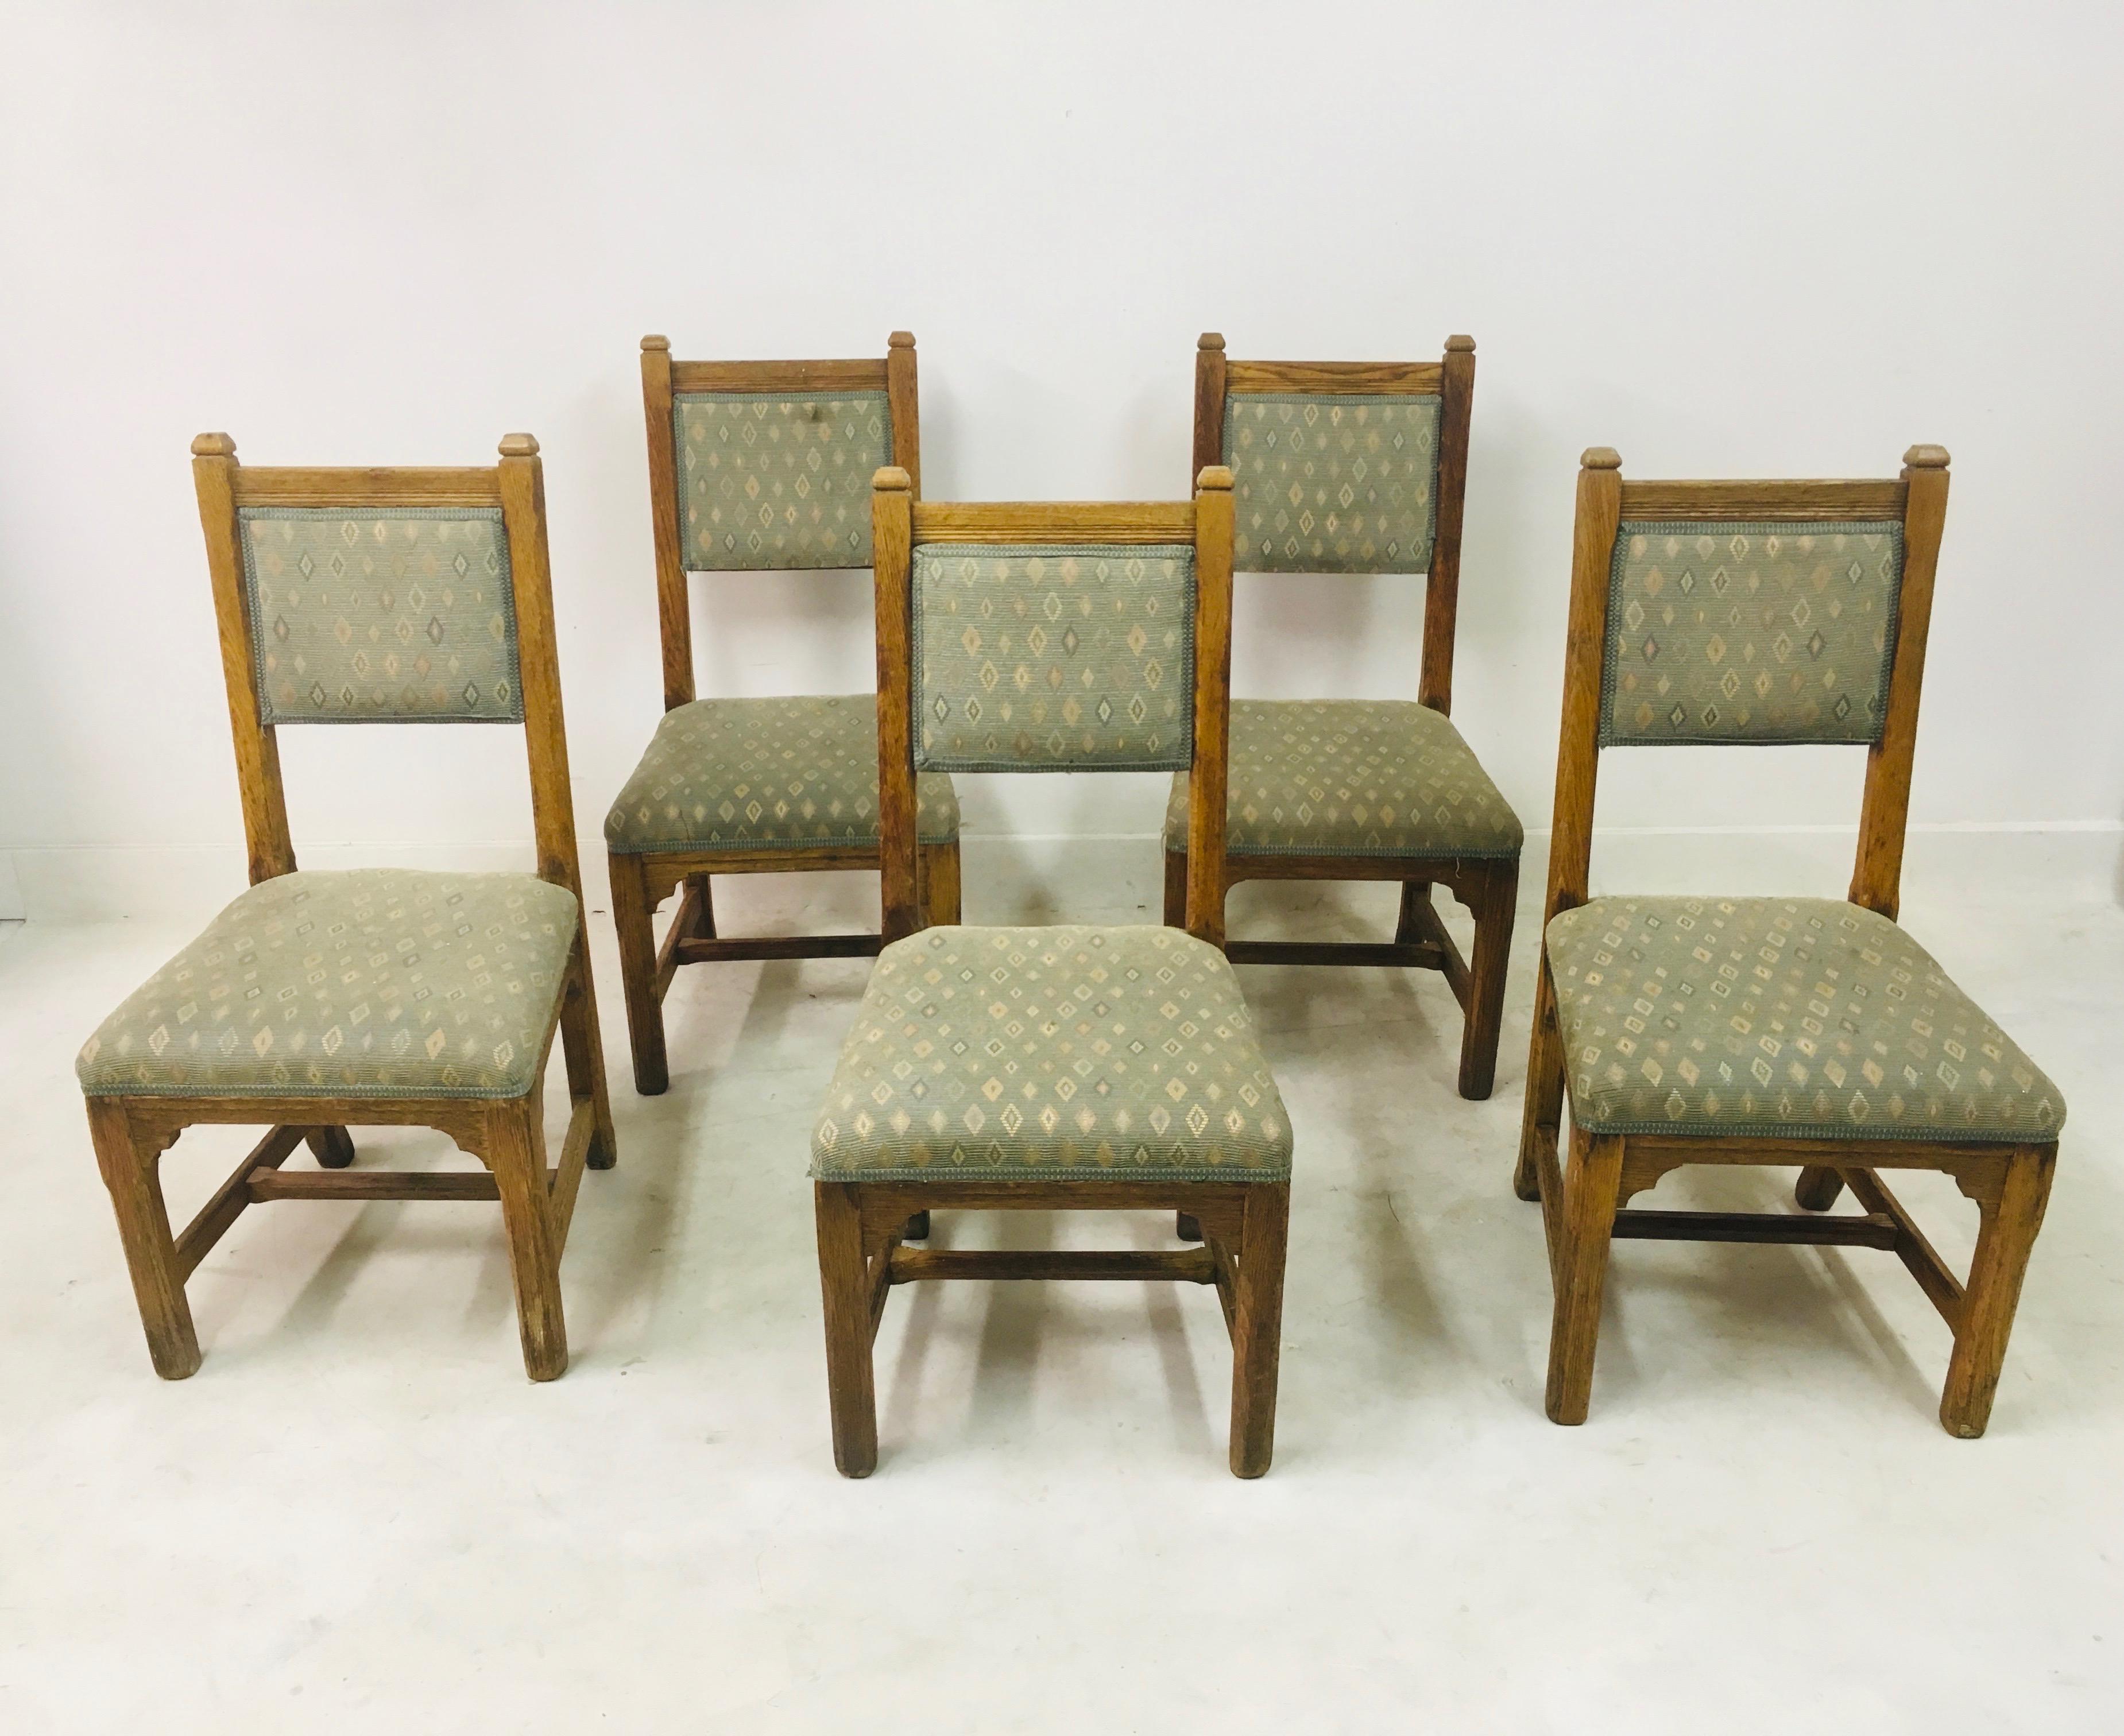 A set of five chairs

By Howard and Sons

Stamped

Probably from the Houses of Parliament

Victorian 

Seat height 41cm

In need of new upholstery.